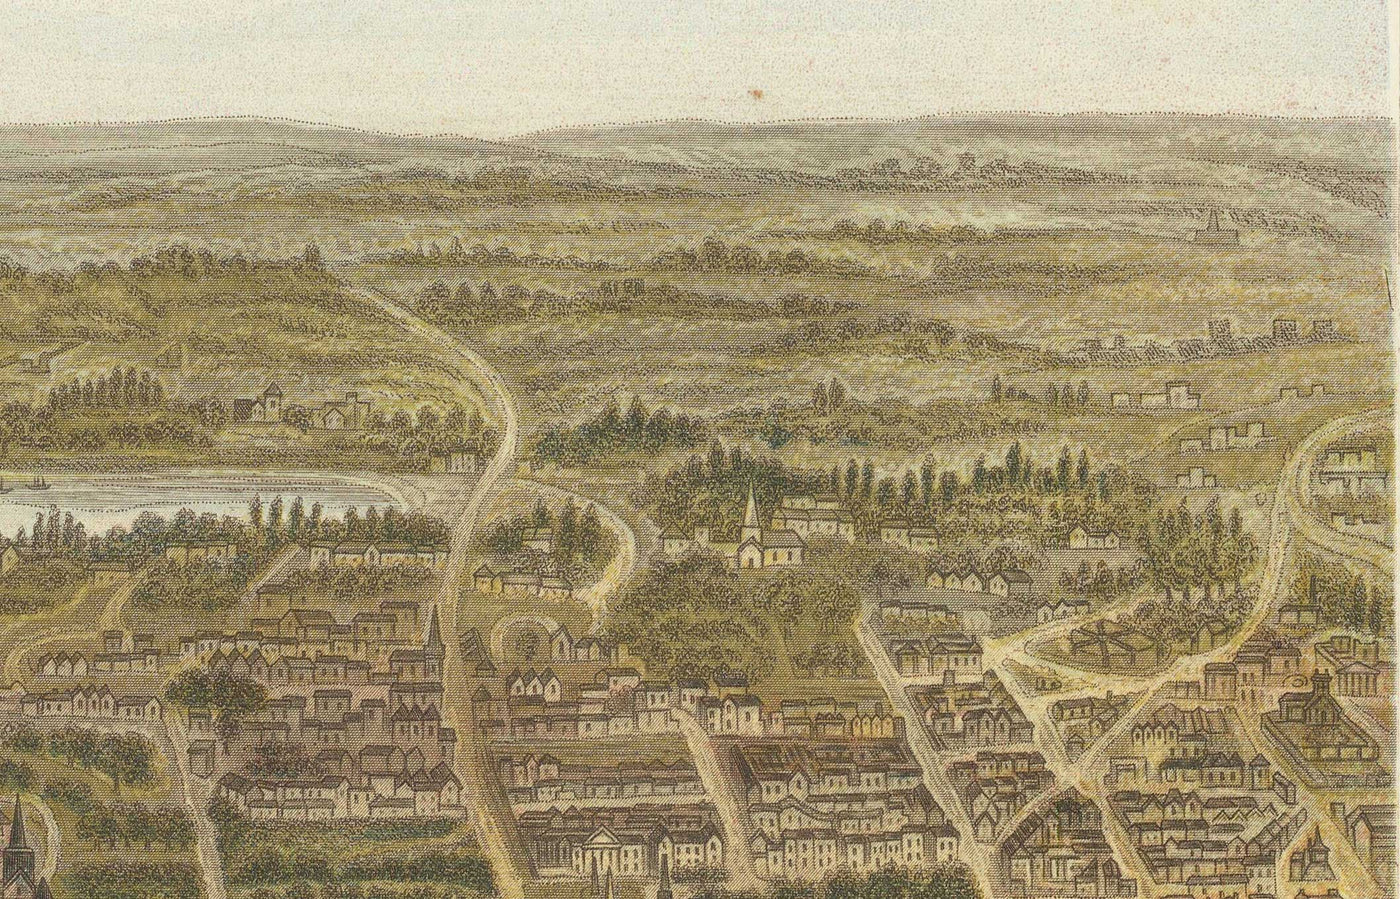 Old Bird Eye's View of Sydney in 1875 by William Collins - New South Wales, St George, Sutherland Shire, South, Inner West